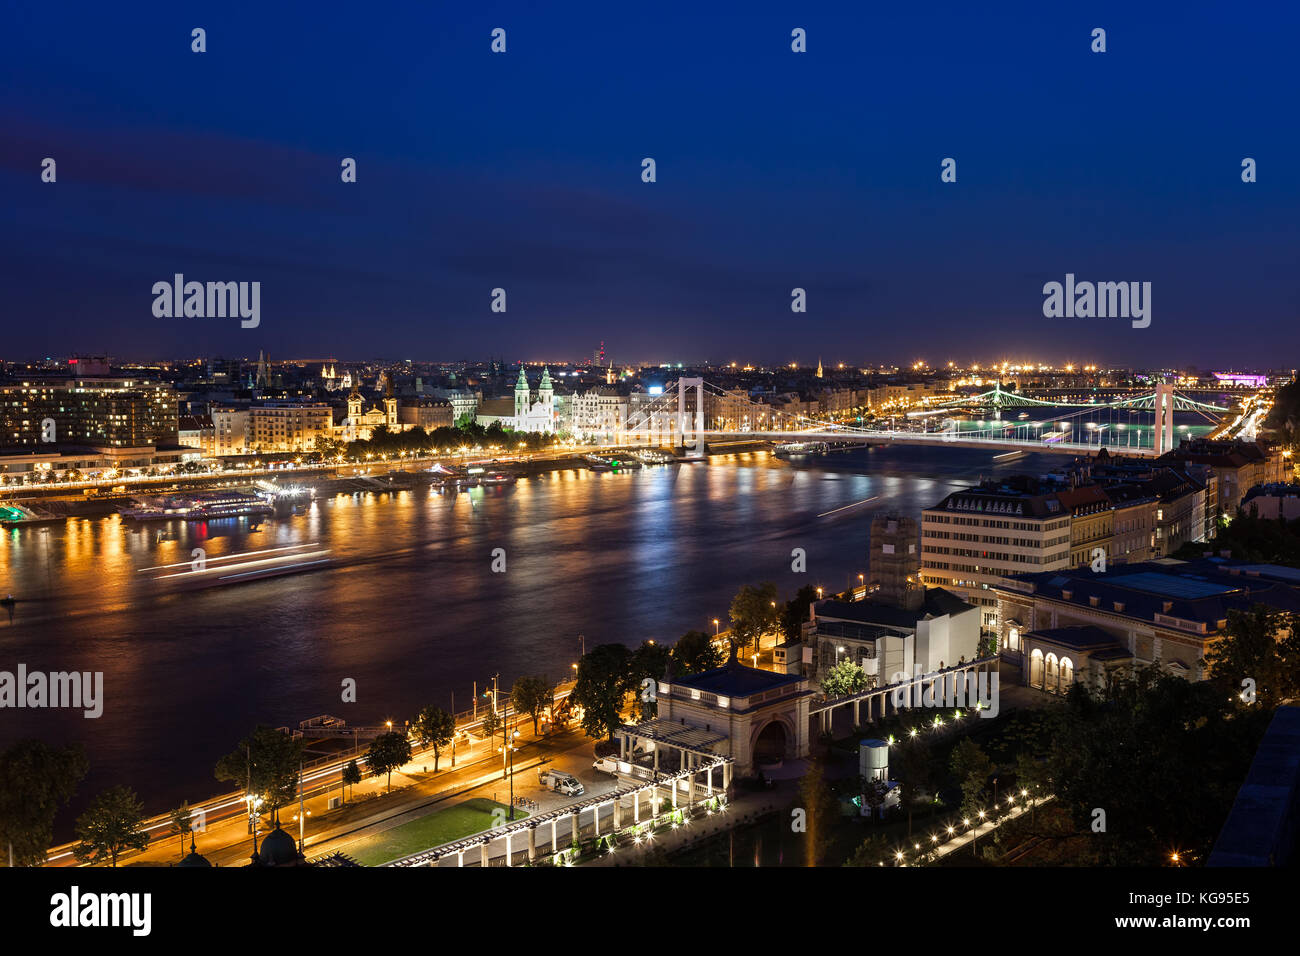 Budapest city skyline by night in Hungary, urban nightscape along Danube River Stock Photo